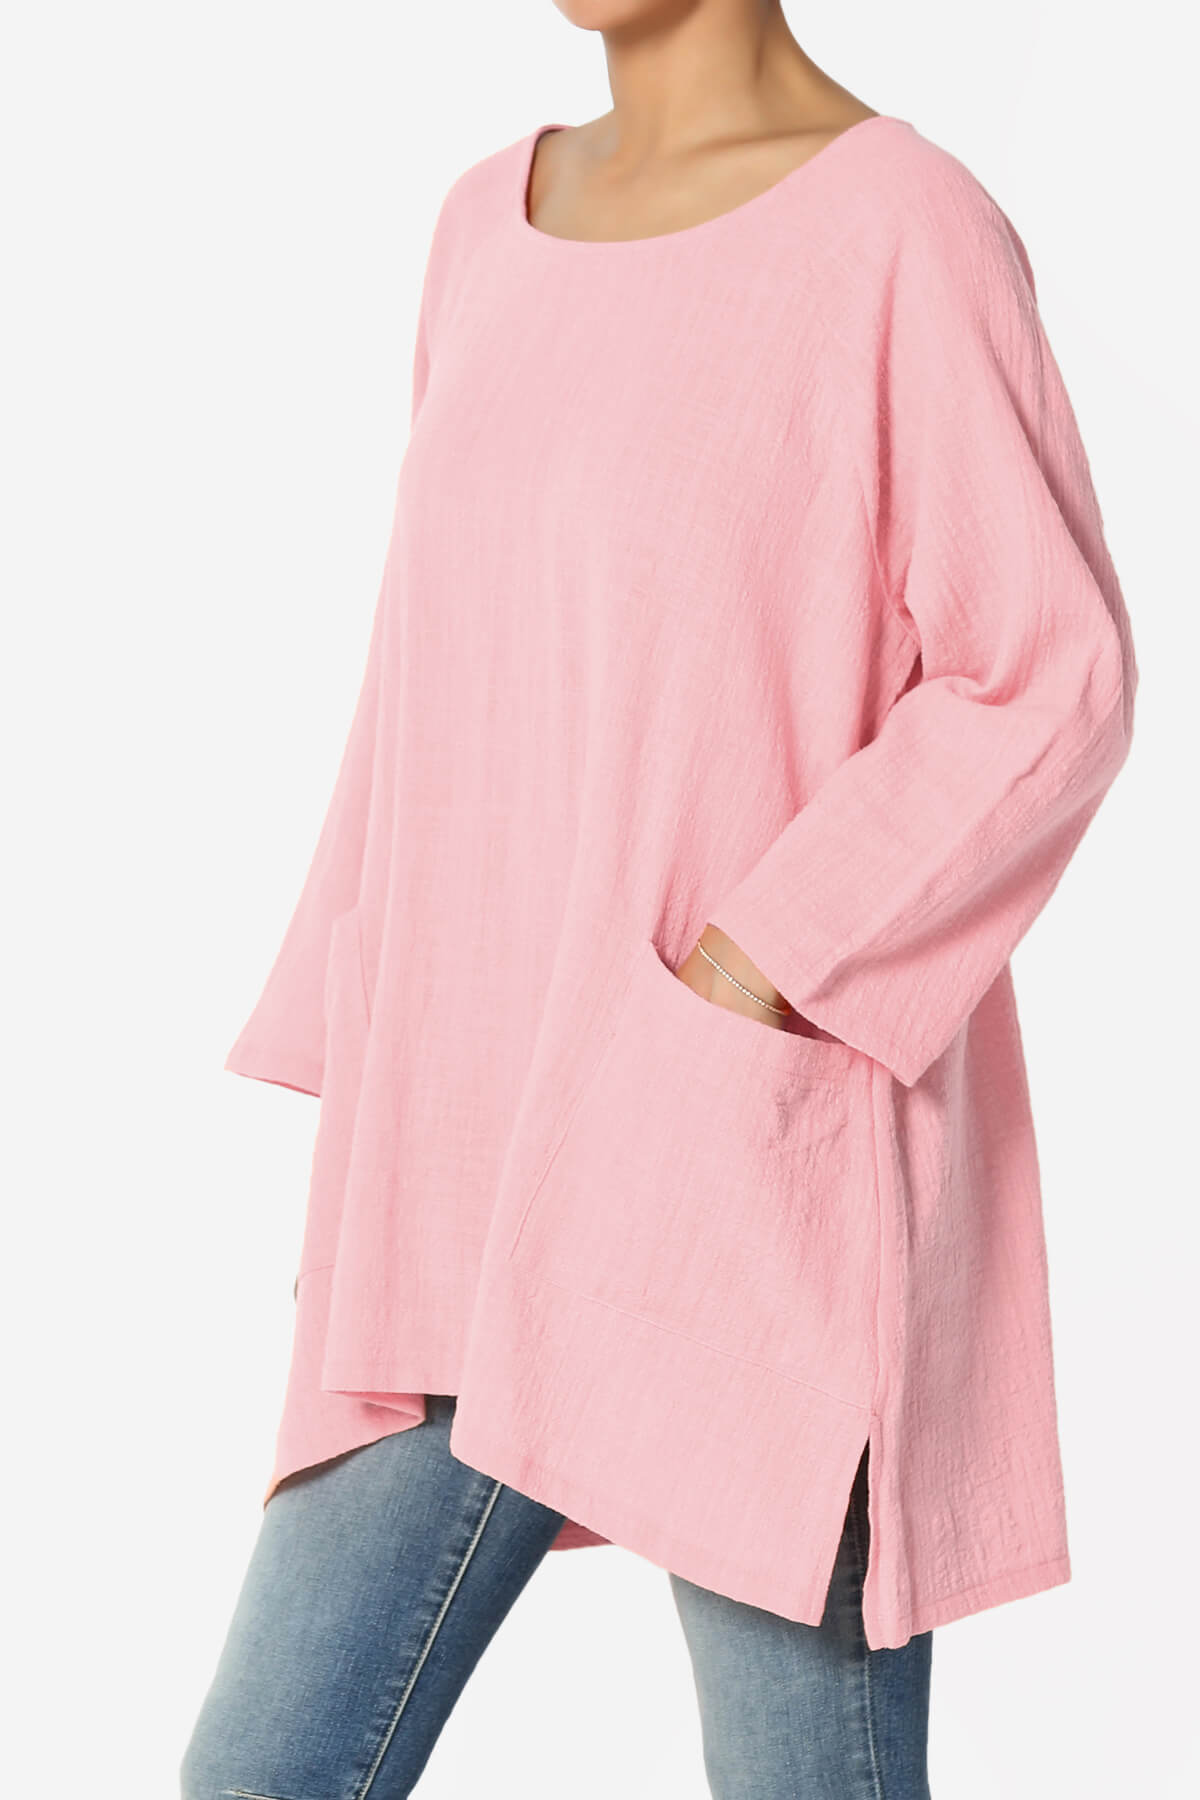 Load image into Gallery viewer, Nesta Gauze Pocket Cover Up Top DARK PINK_3
